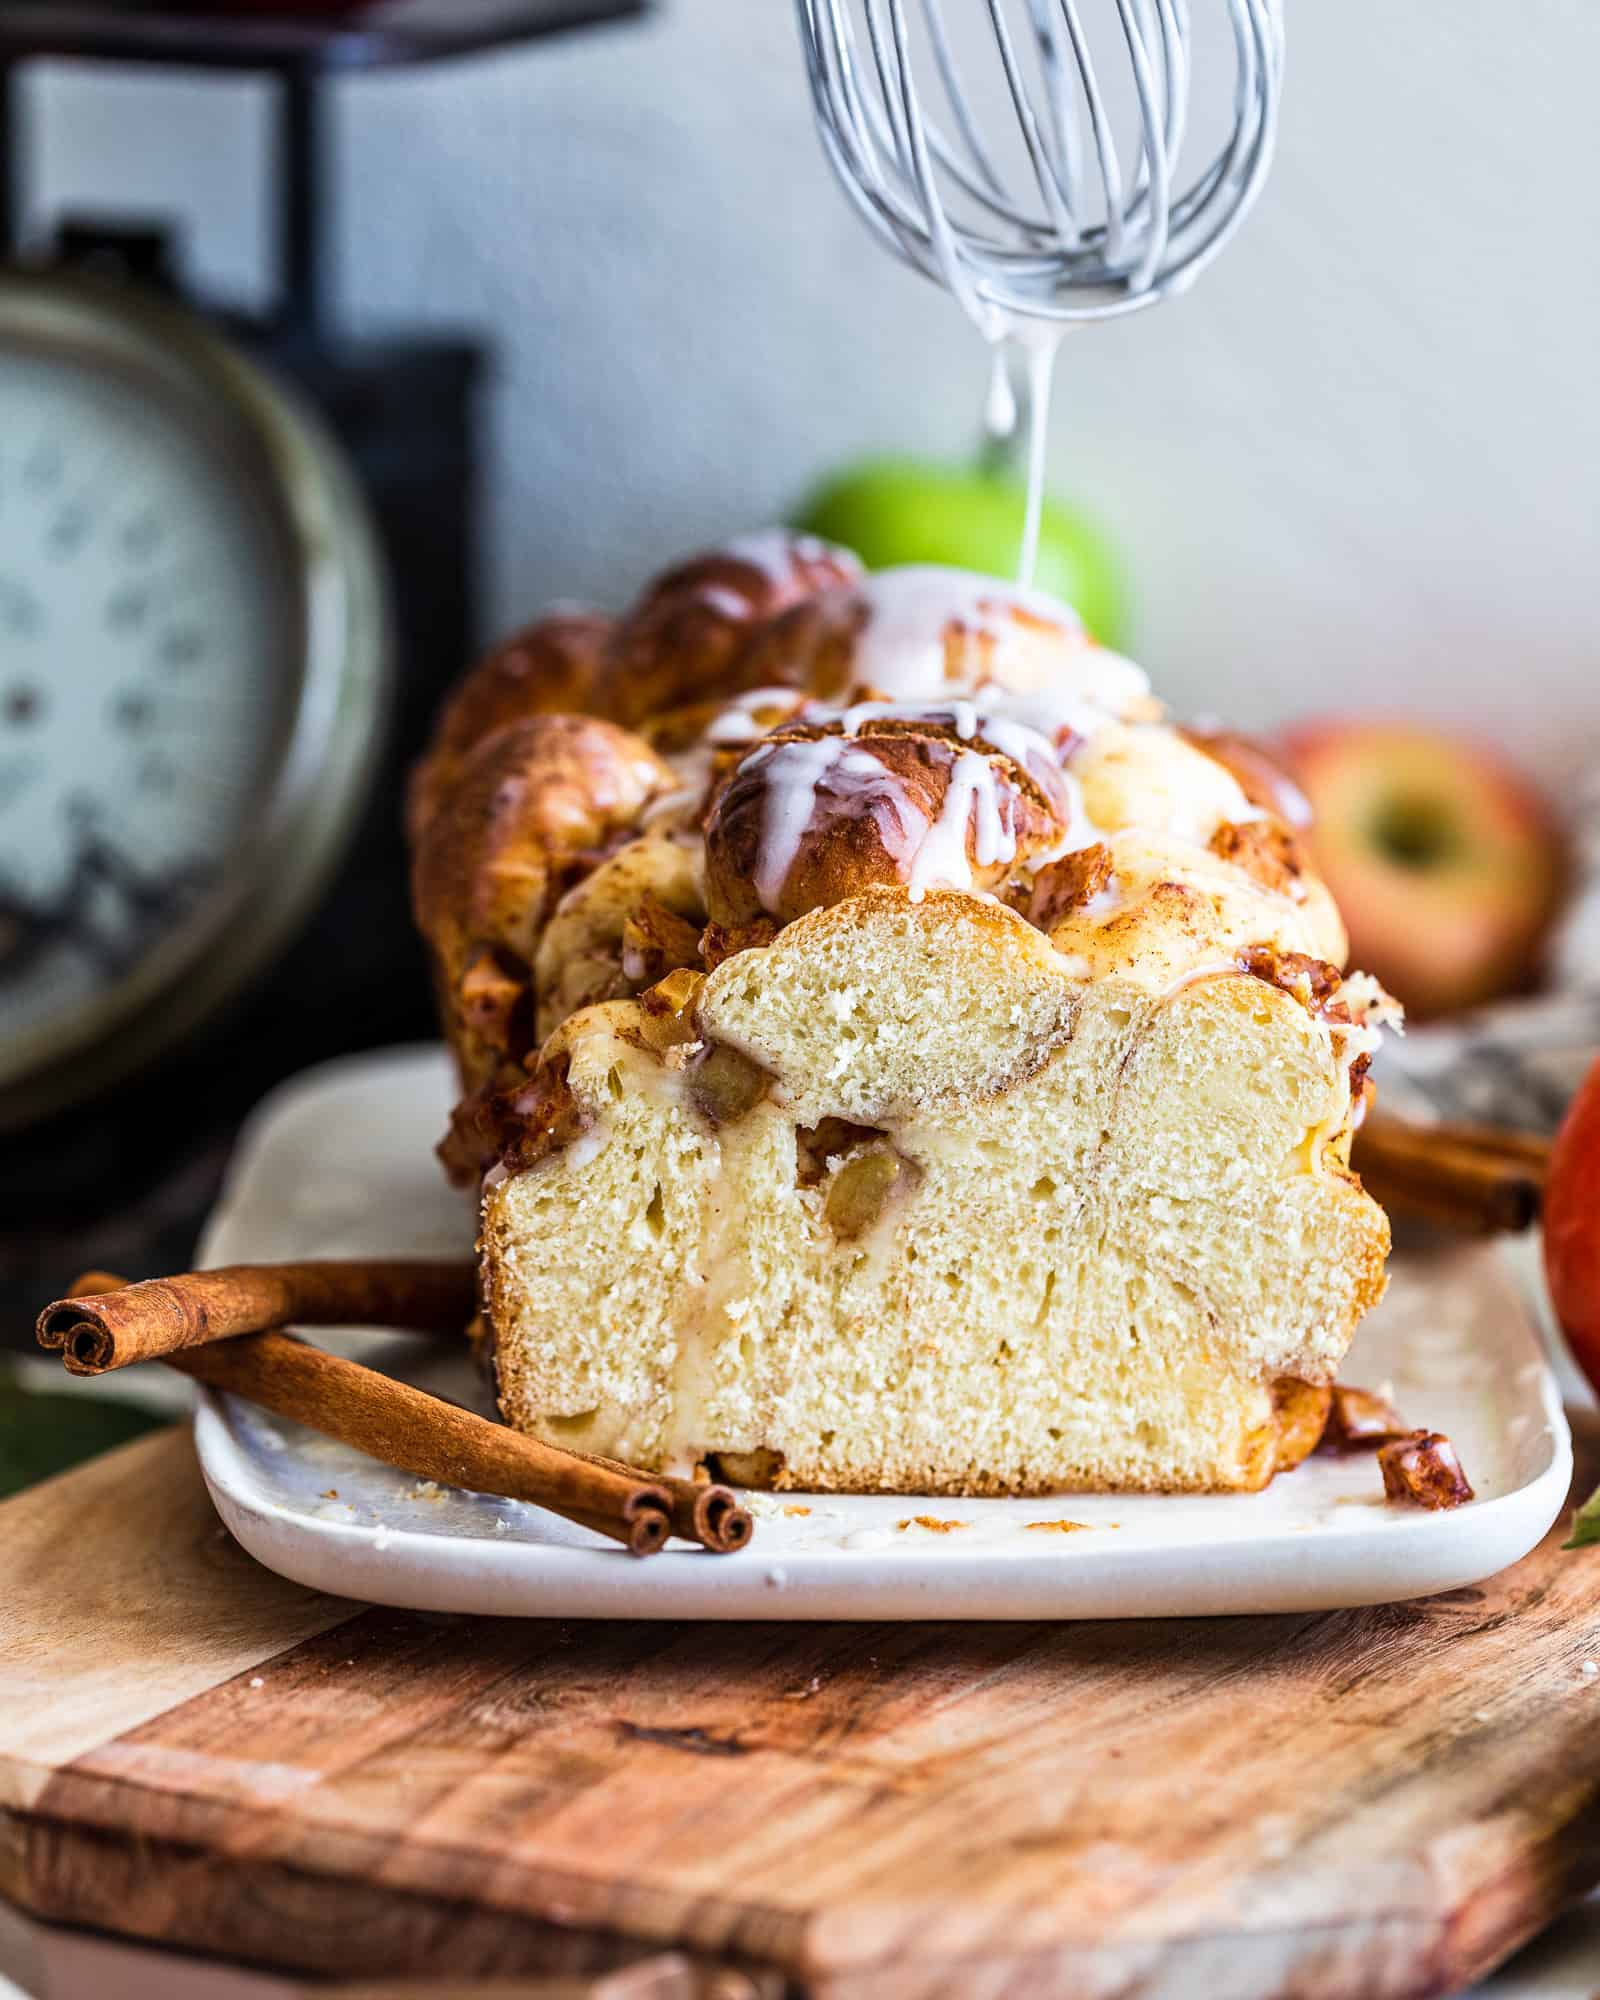 Apple and Pear Bread with whisk drizzling glaze on top